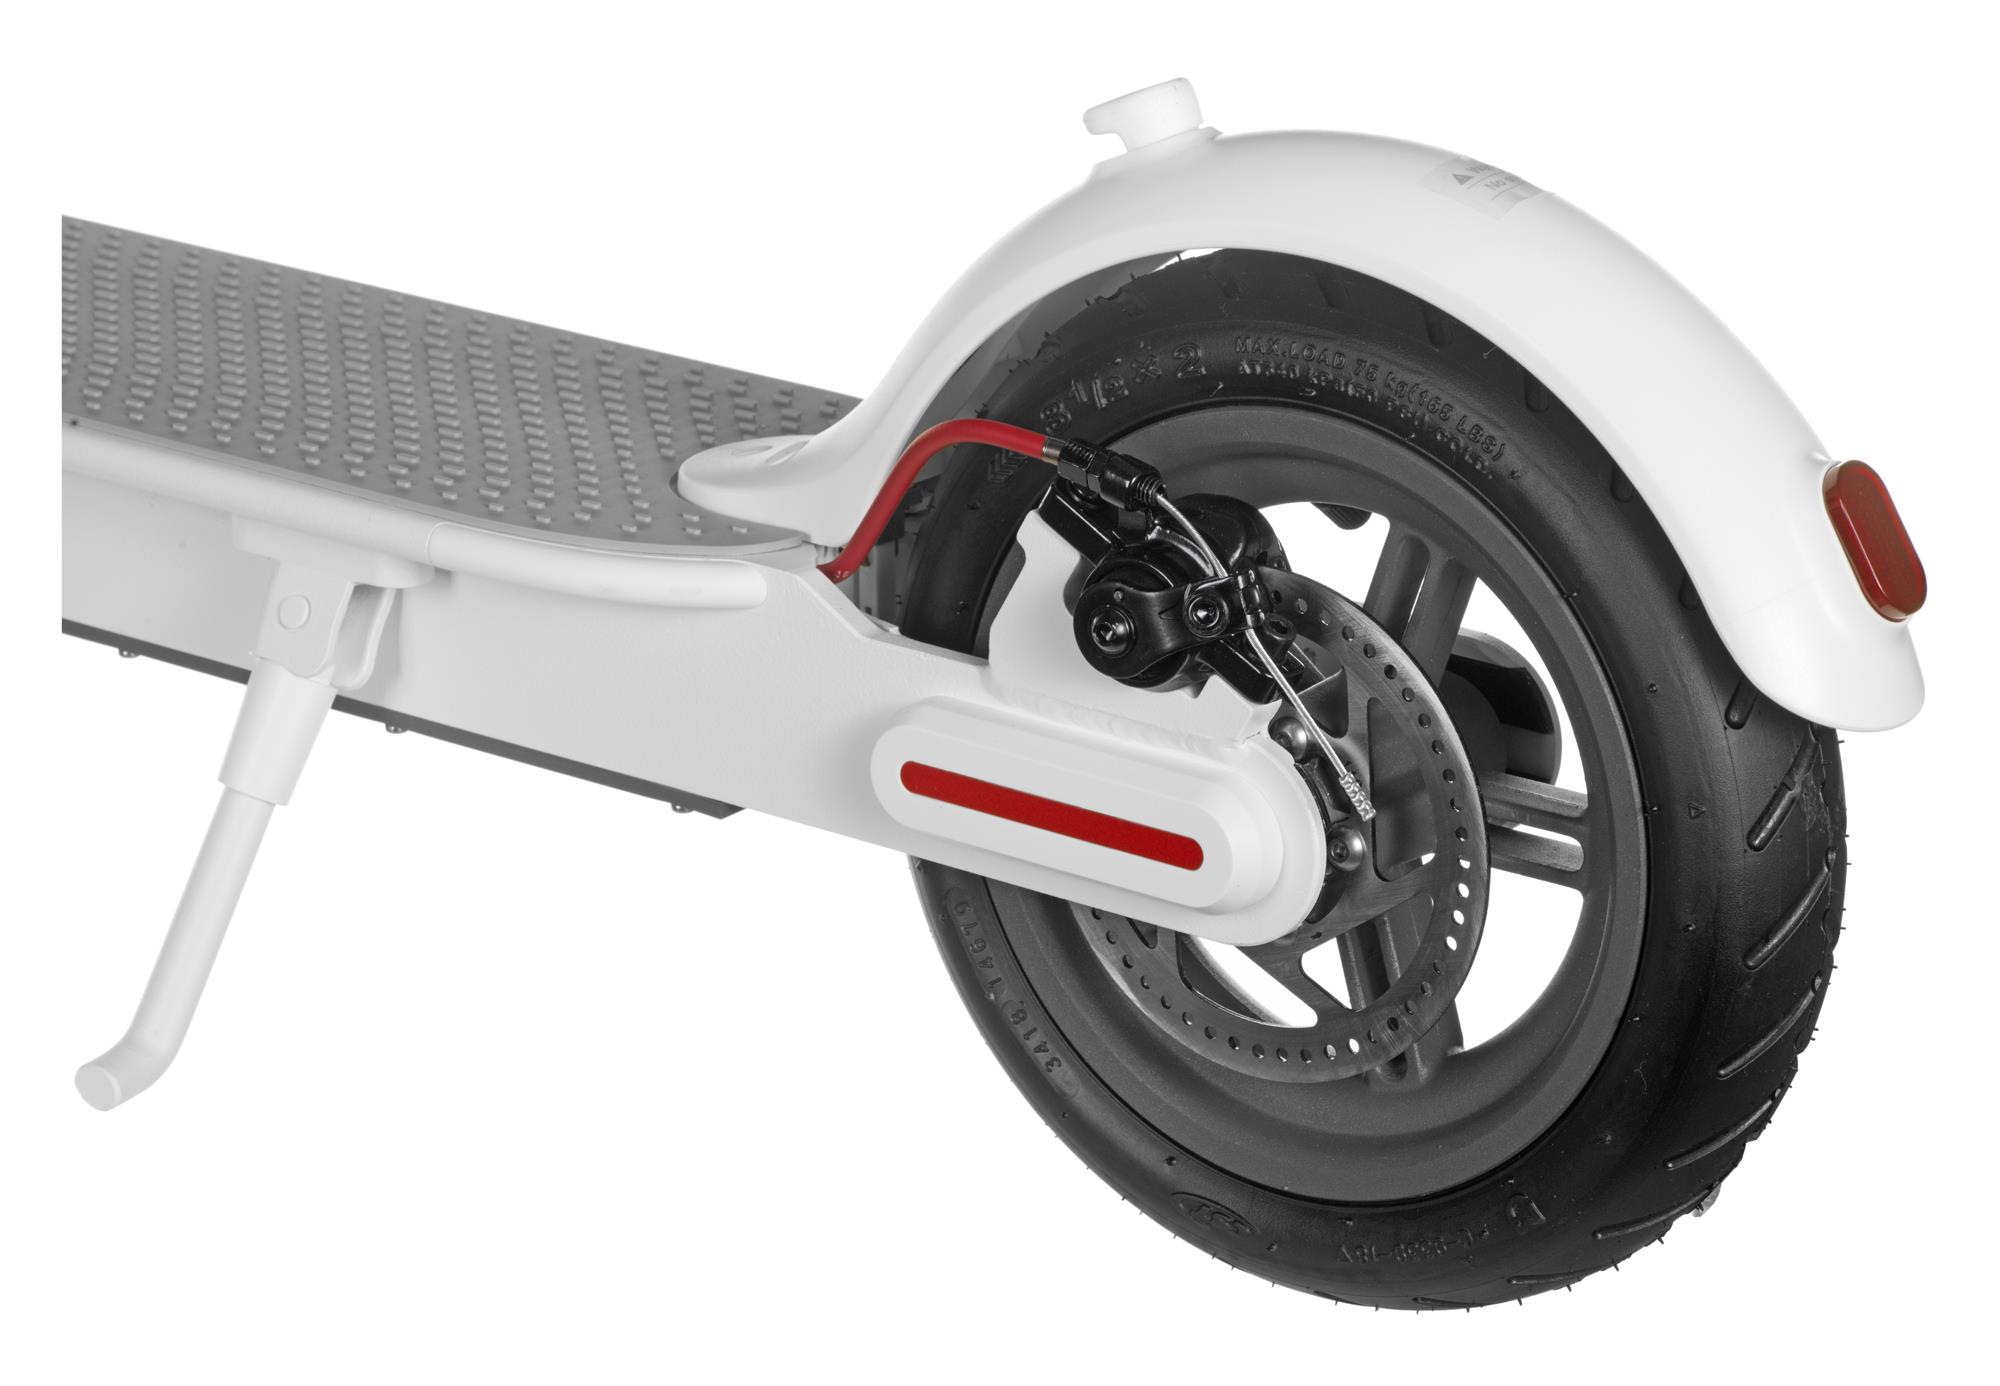 Xiaomi Electric Scooter 1s White